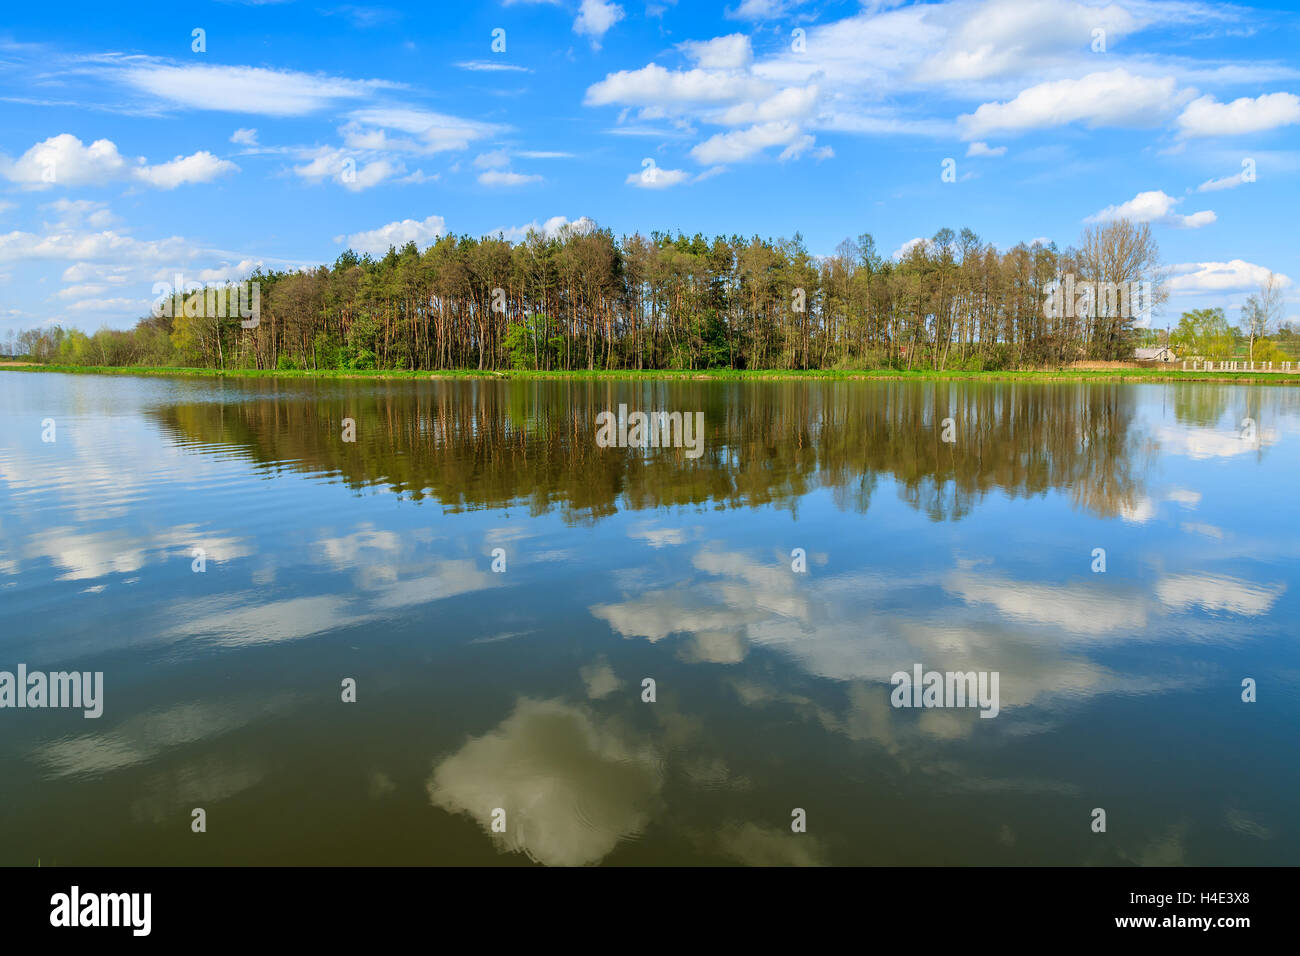 Reflection of clouds in water of a lake and trees in background - idyllic scenic landscape view, Poland Stock Photo